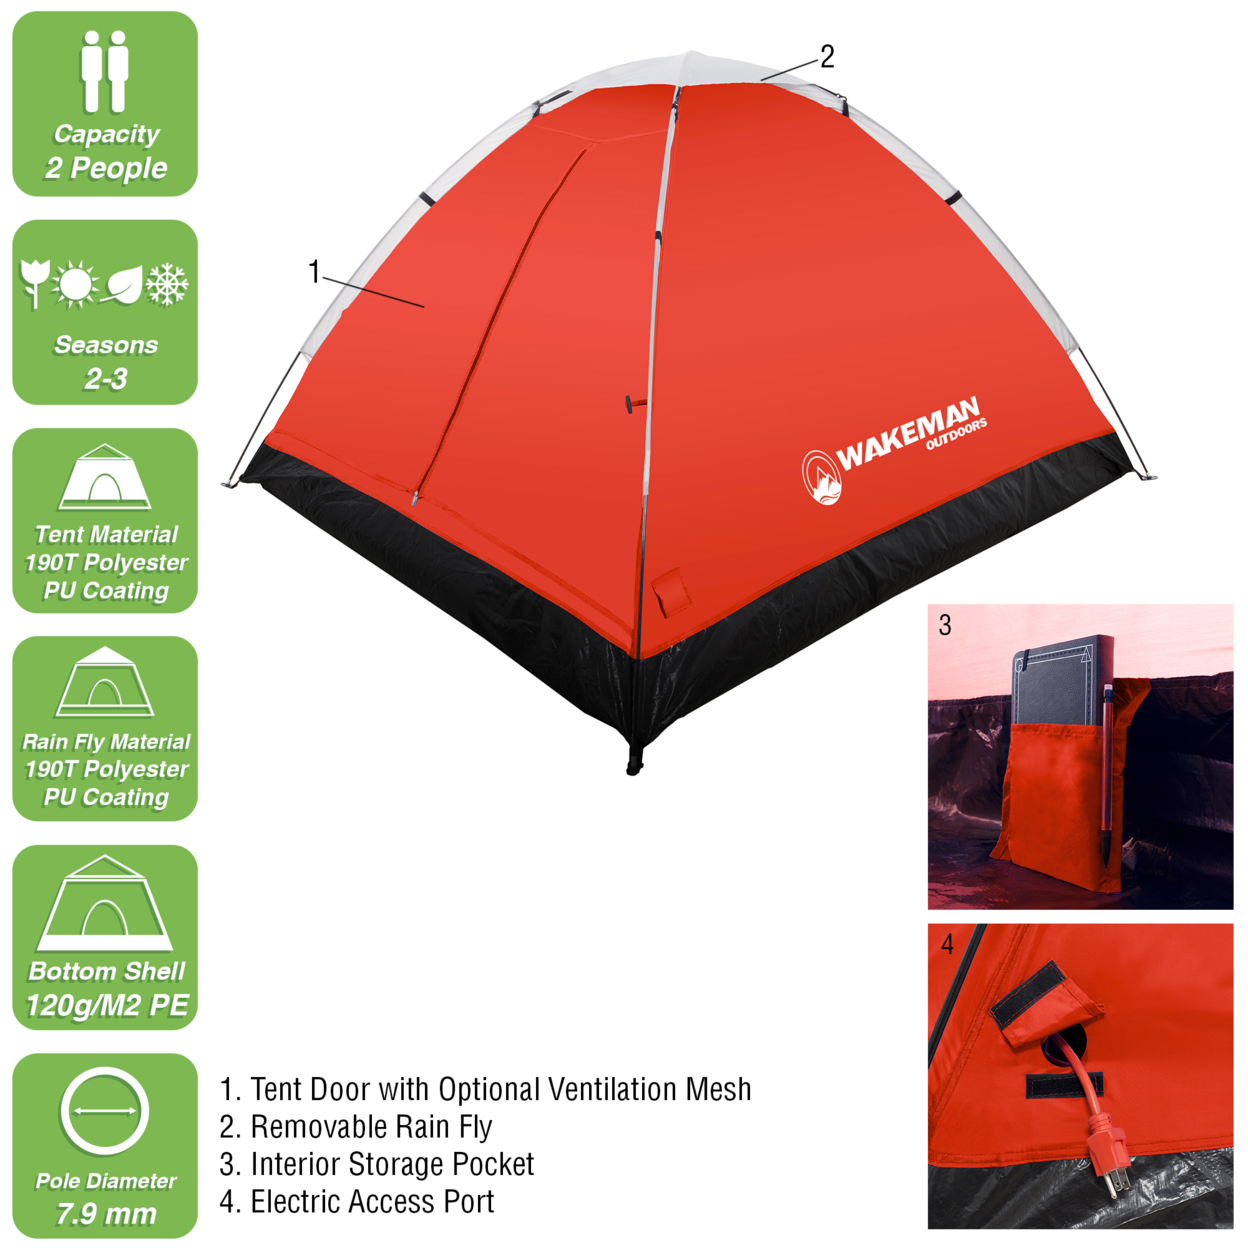 2-Person Tent, Water Resistant Dome Tent For Camping With Removable Rain Fly And Carry Bag, Lost River 2 Person Tent (Red/Gray)